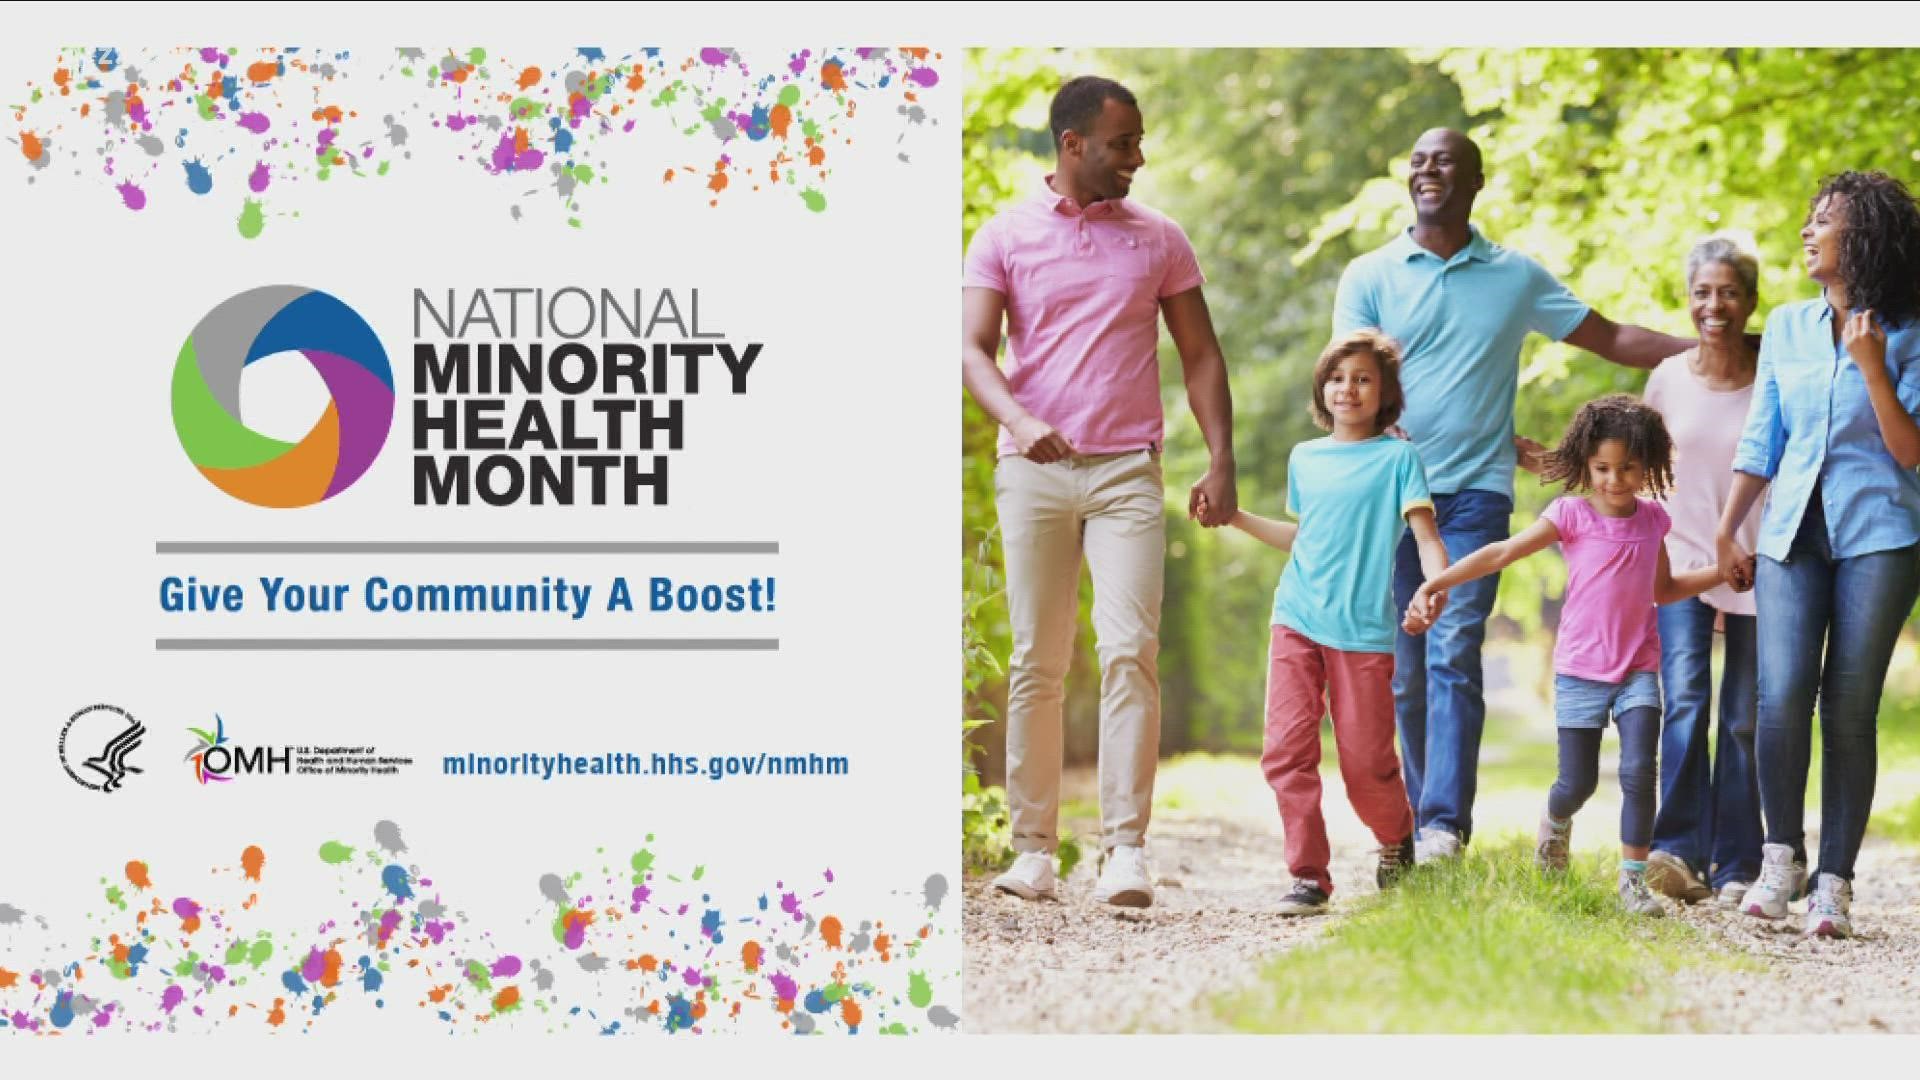 April marks minority health month, it's a time to promote and address growing health disparities in communities of color.